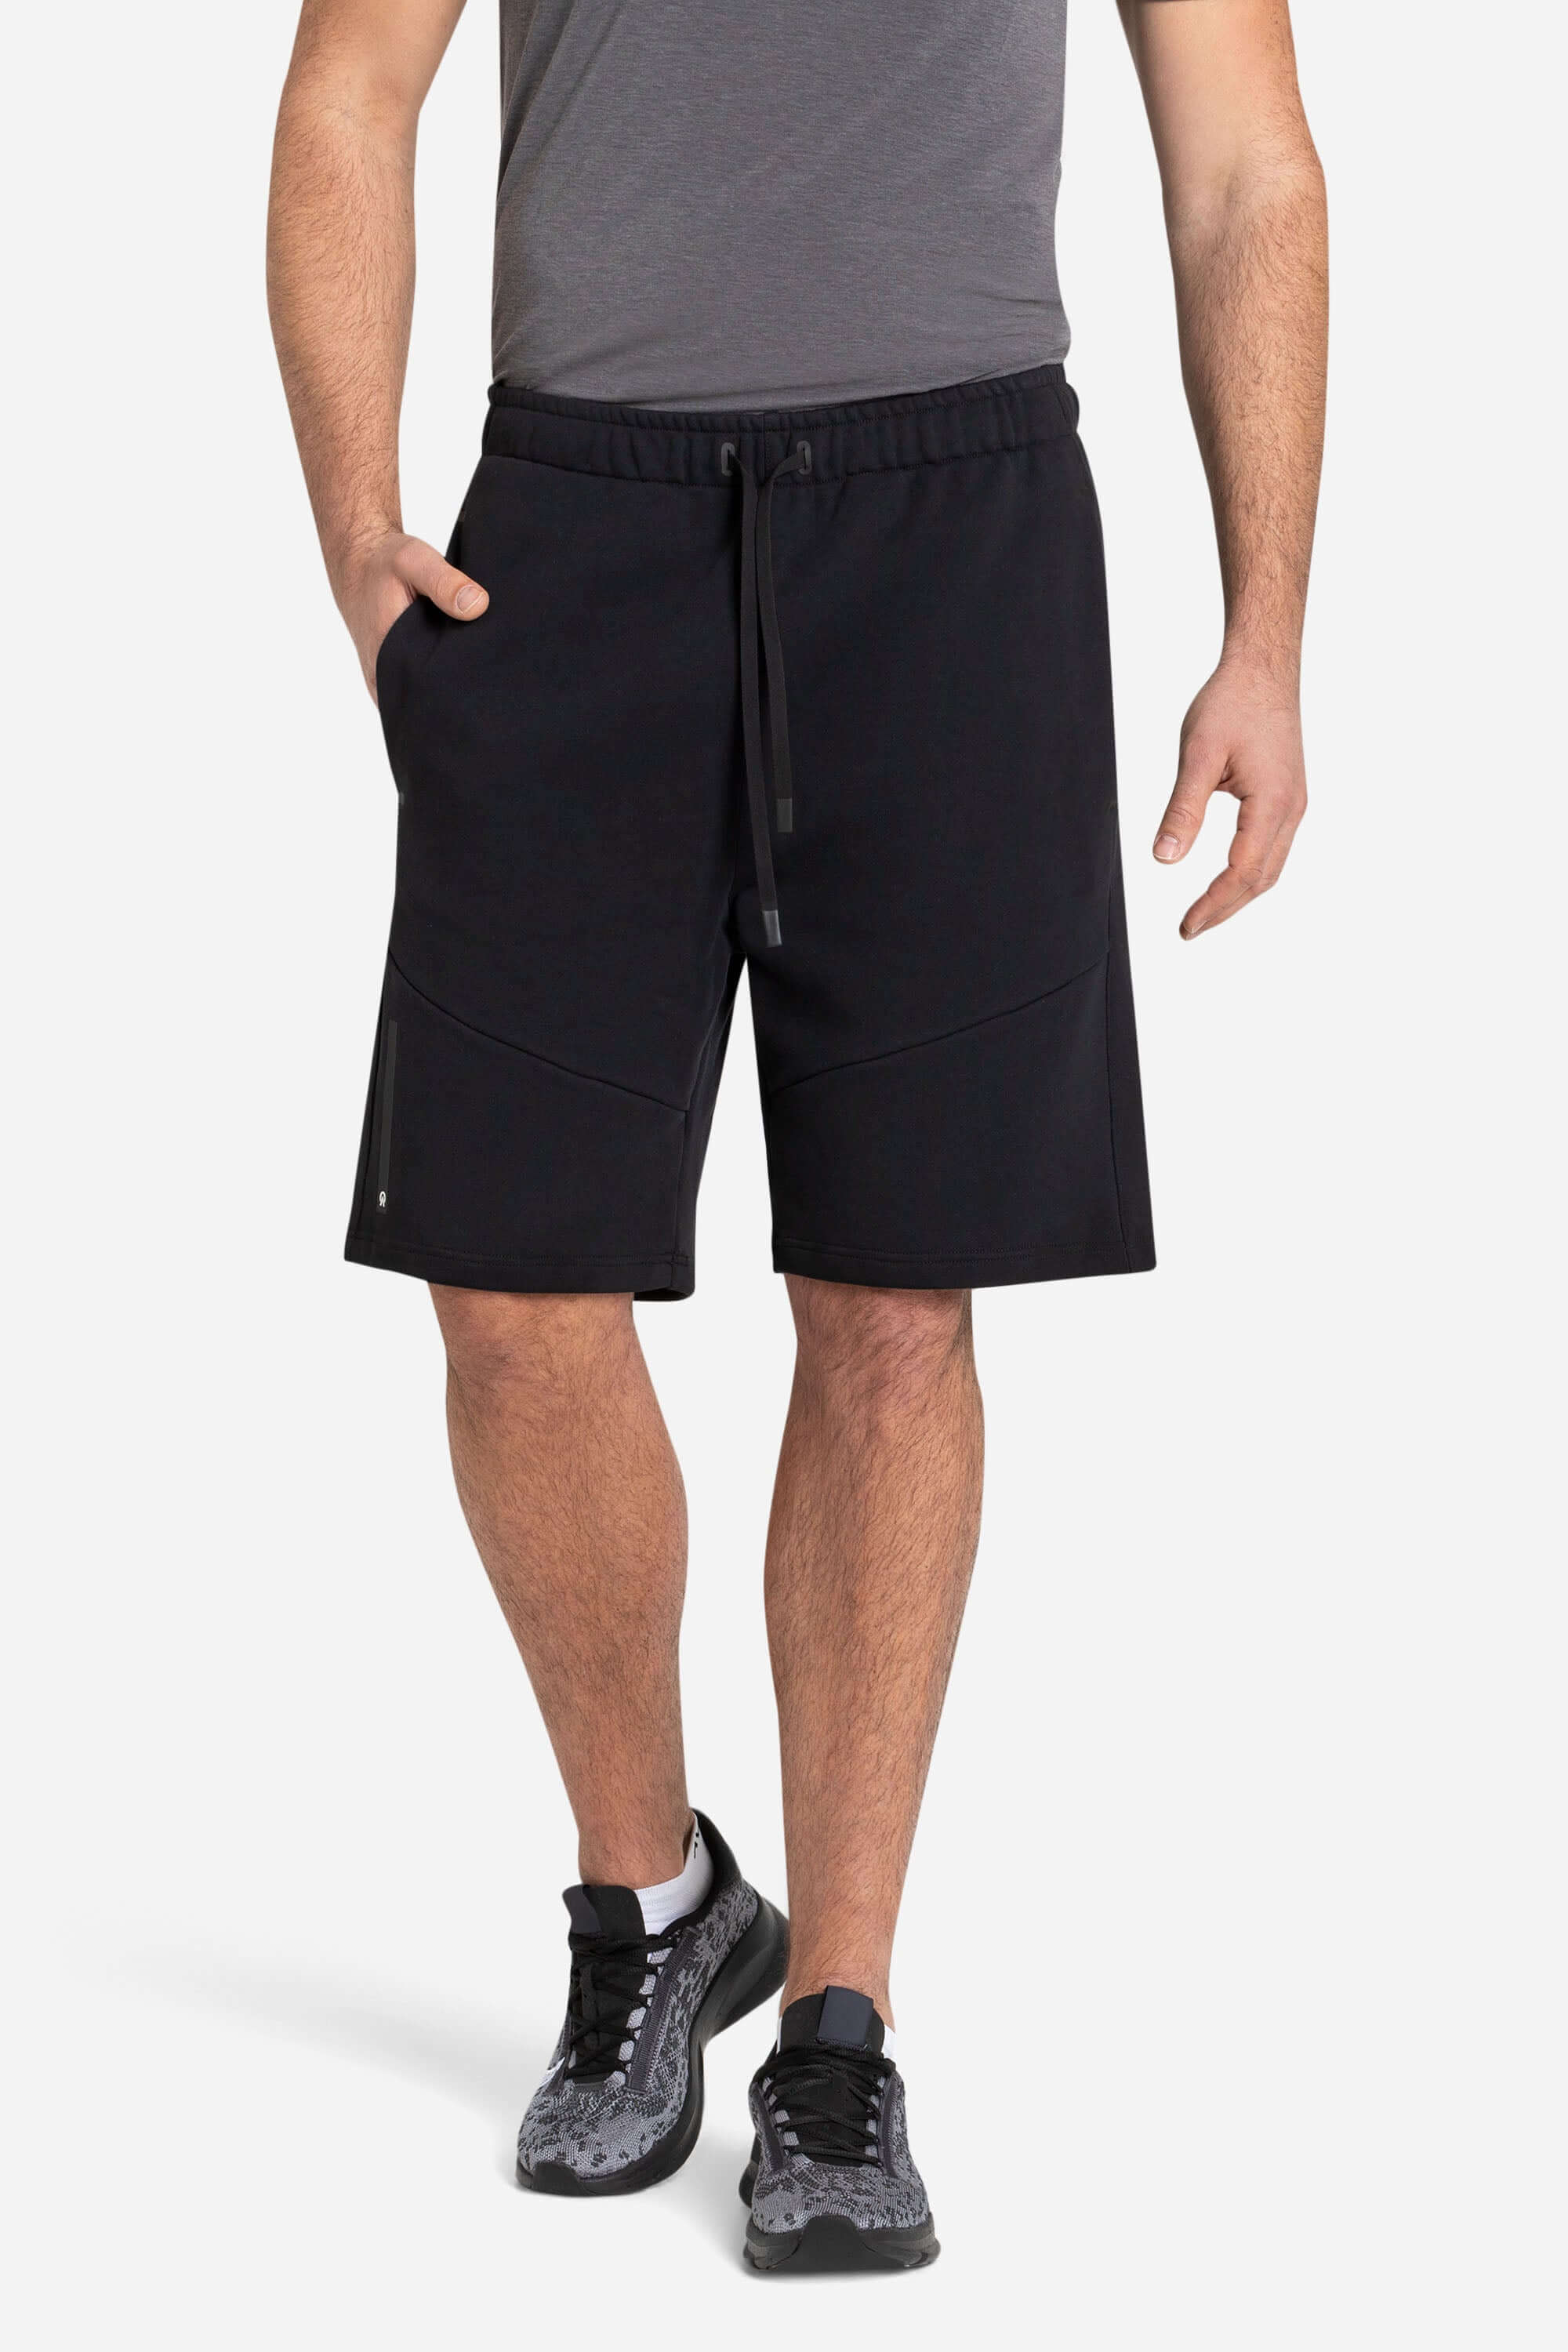 Training and leisure shorts in black from AYCANE